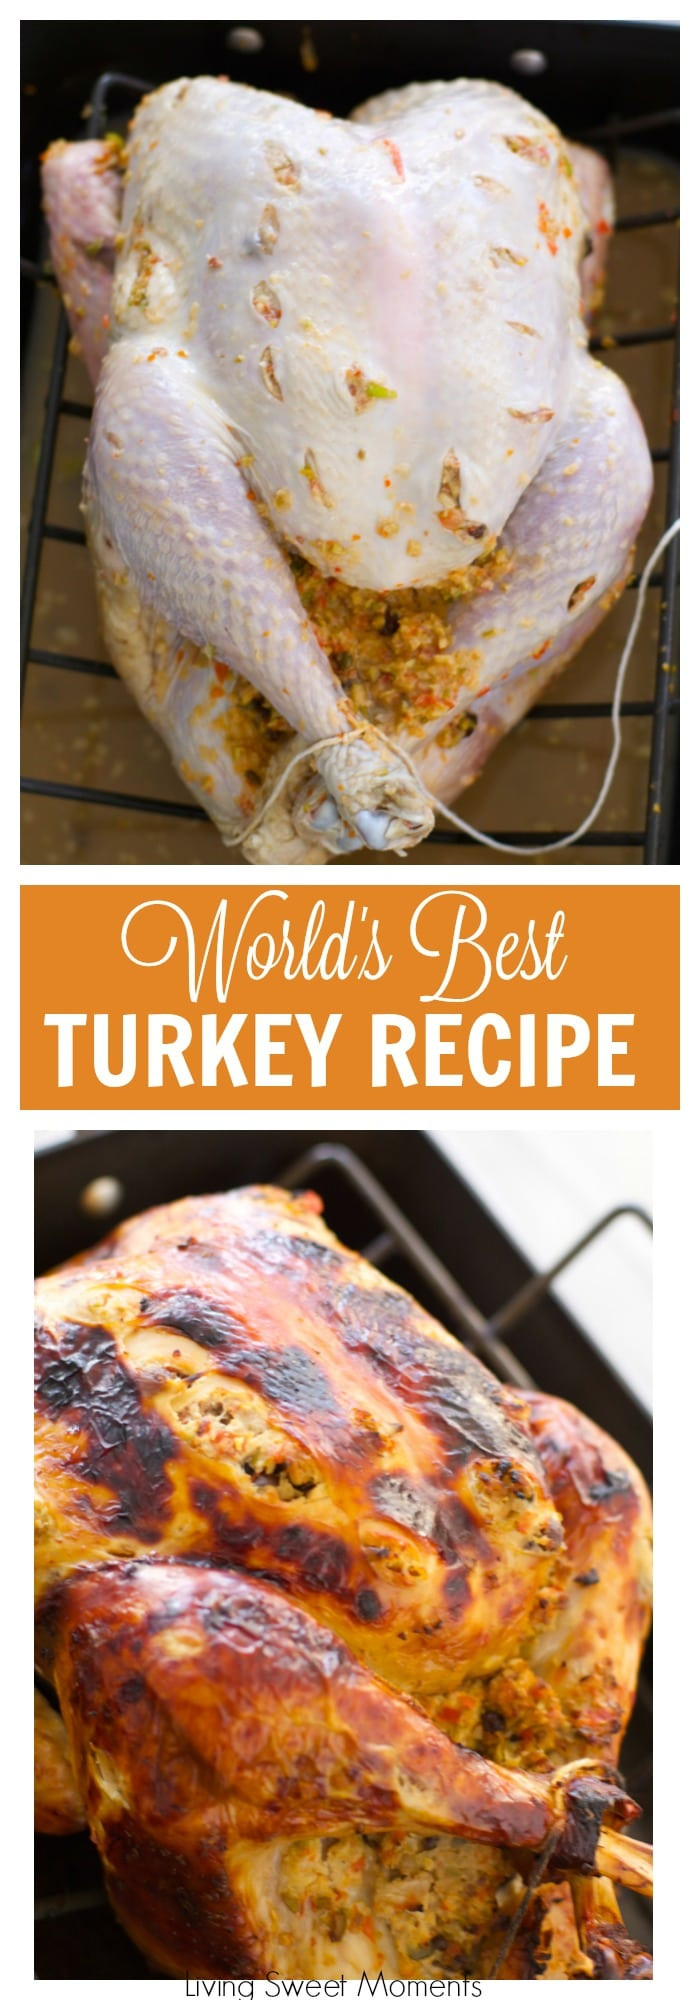 The Best Turkey Recipes For Thanksgiving
 The World s Best Turkey Recipe A Tutorial Living Sweet